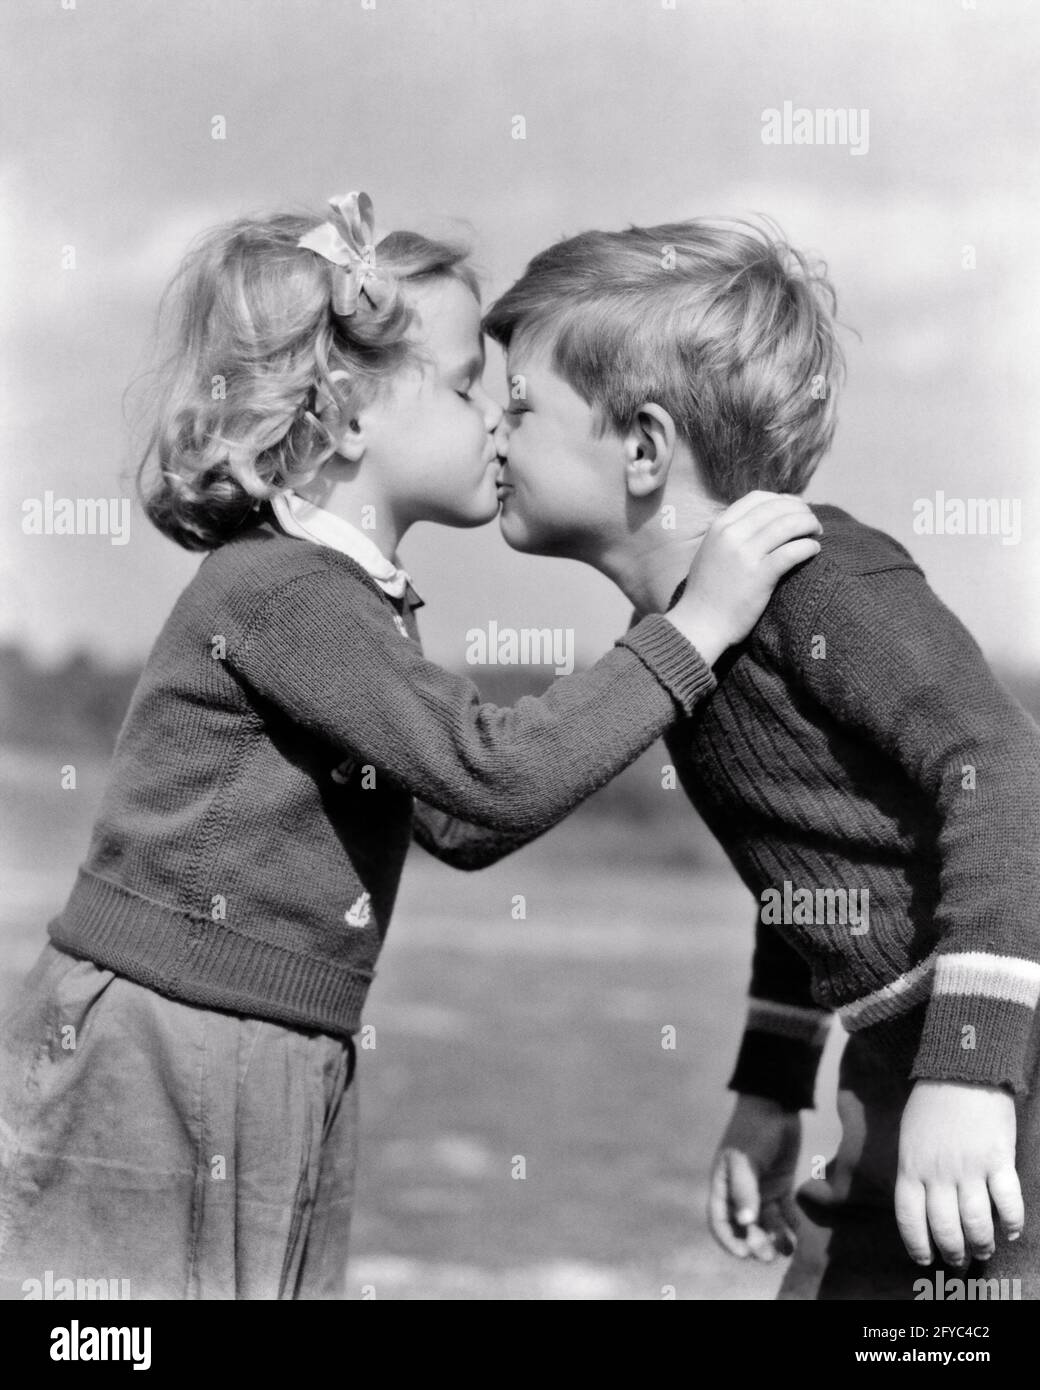 1930s 1940s SERIOUS LITTLE GIRL KISSING SMILING LITTLE BOY BOTH OUTDOORS WEARING KNIT WOOL SWEATERS - j8696 HAR001 HARS HEALTHINESS HOME LIFE WOOL COPY SPACE FRIENDSHIP HALF-LENGTH CARING MALES B&W KNIT HAPPINESS SWEATERS CONNECTION CONCEPTUAL FRIENDLY PERSONAL ATTACHMENT PLEASANT PUPPY LOVE AFFECTION AGREEABLE CHARMING EMOTION JUVENILES LOVABLE PECK PLEASING SMOOCH TOGETHERNESS ADORABLE APPEALING BLACK AND WHITE CAUCASIAN ETHNICITY HAR001 OLD FASHIONED Stock Photo